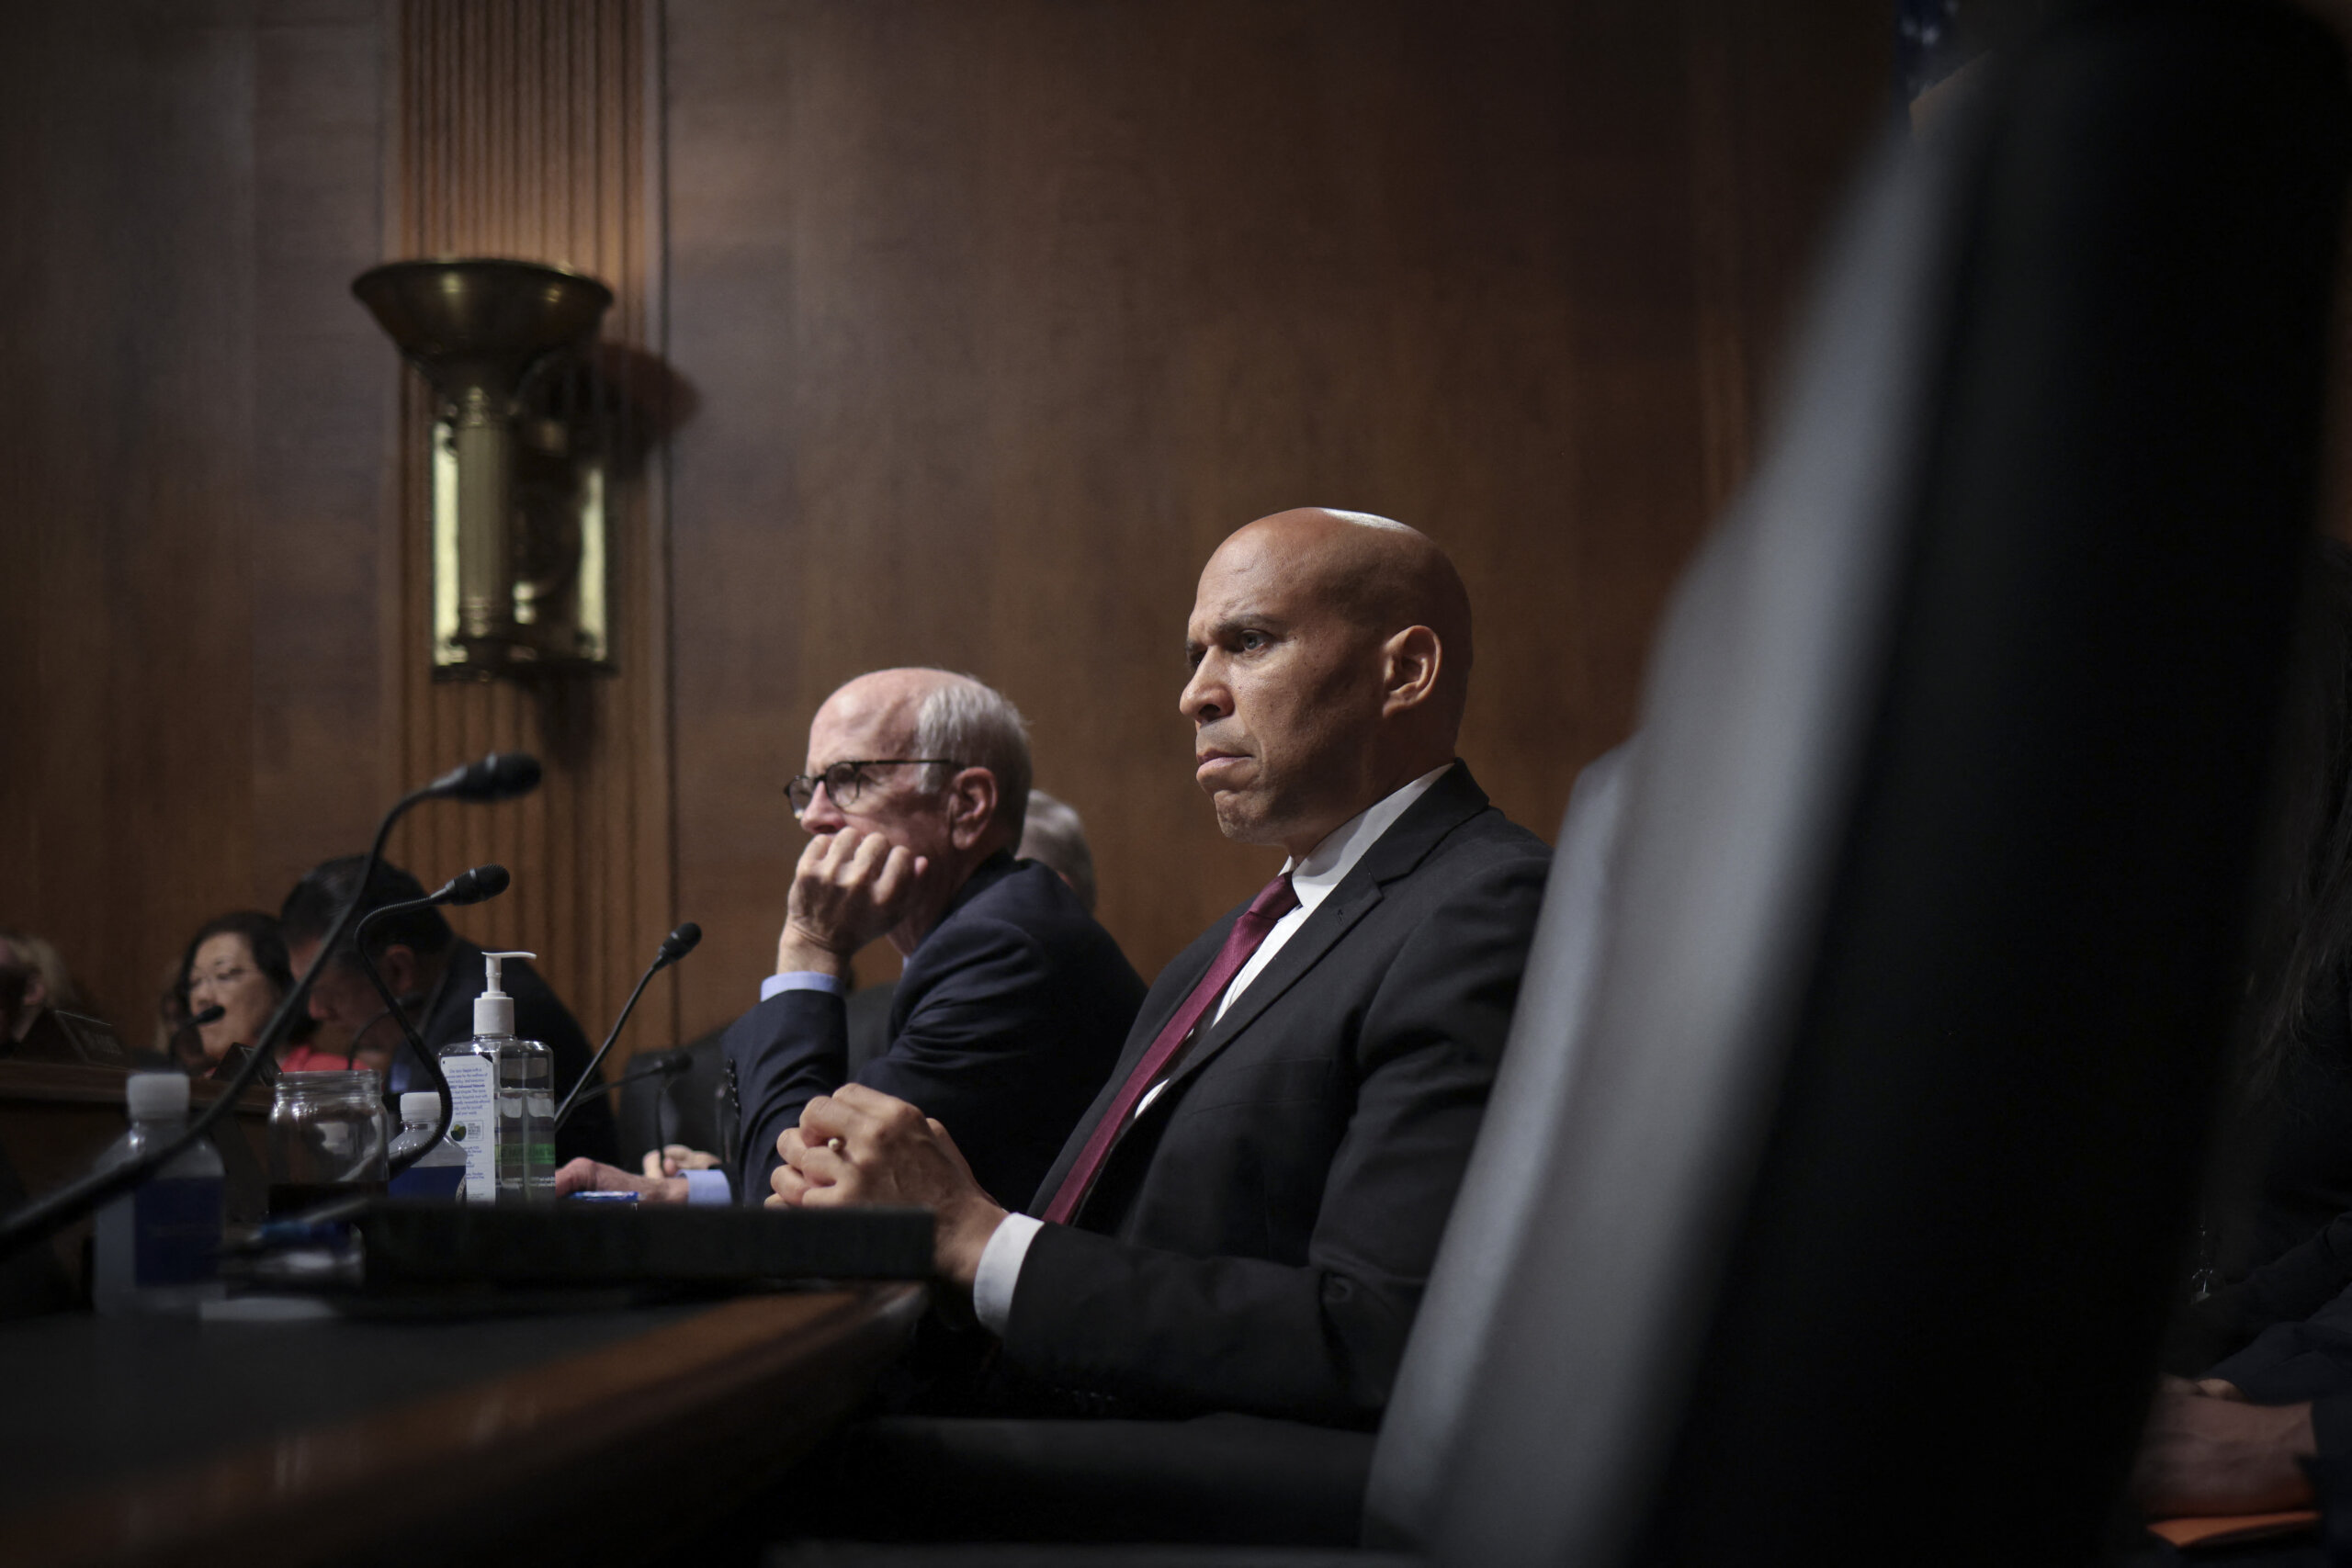 WASHINGTON, DC - MAY 16: Sen. Cory Booker (R) (D-NJ) asks questions as Samuel Altman, CEO of OpenAI, testifies before the Senate Judiciary Subcommittee on Privacy, Technology, and the Law May 16, 2023 in Washington, DC. The committee held an oversight hearing to examine A.I., focusing on rules for artificial intelligence. Win McNamee/Getty Images/AFP (Photo by WIN MCNAMEE / GETTY IMAGES NORTH AMERICA / Getty Images via AFP)